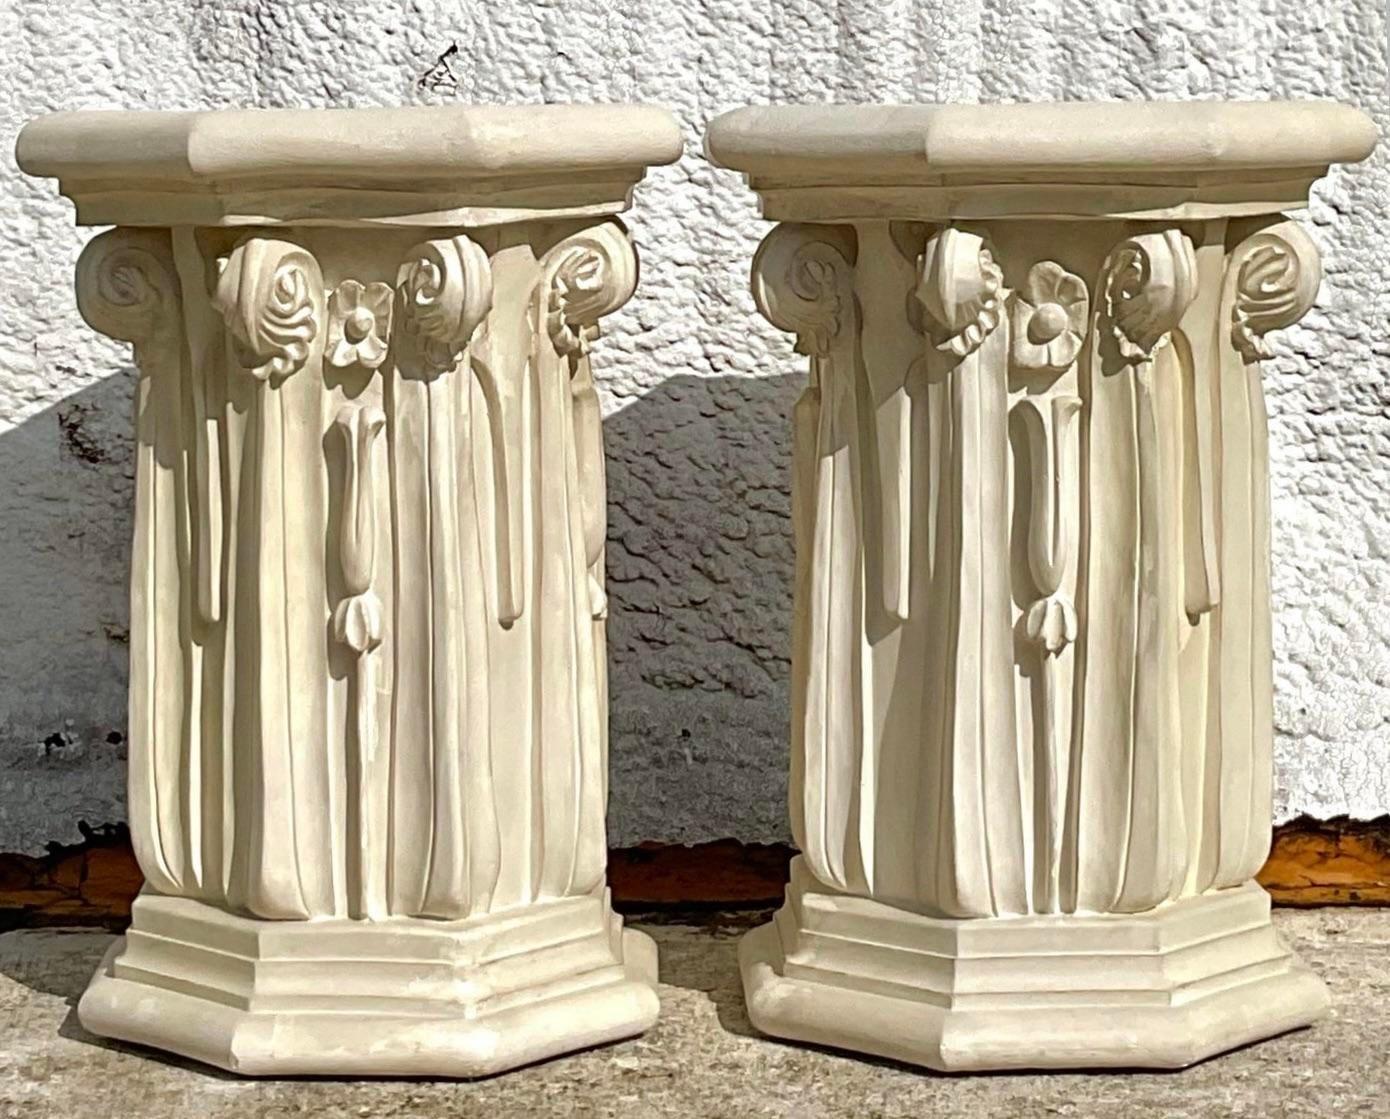 This ornately detailed pedestal adds a quick sense of class to any room. At its height it can be used as either a table base or a freestanding pedestal. The scroll drapery detailing is elegant while whimsy perfect to add into so many different